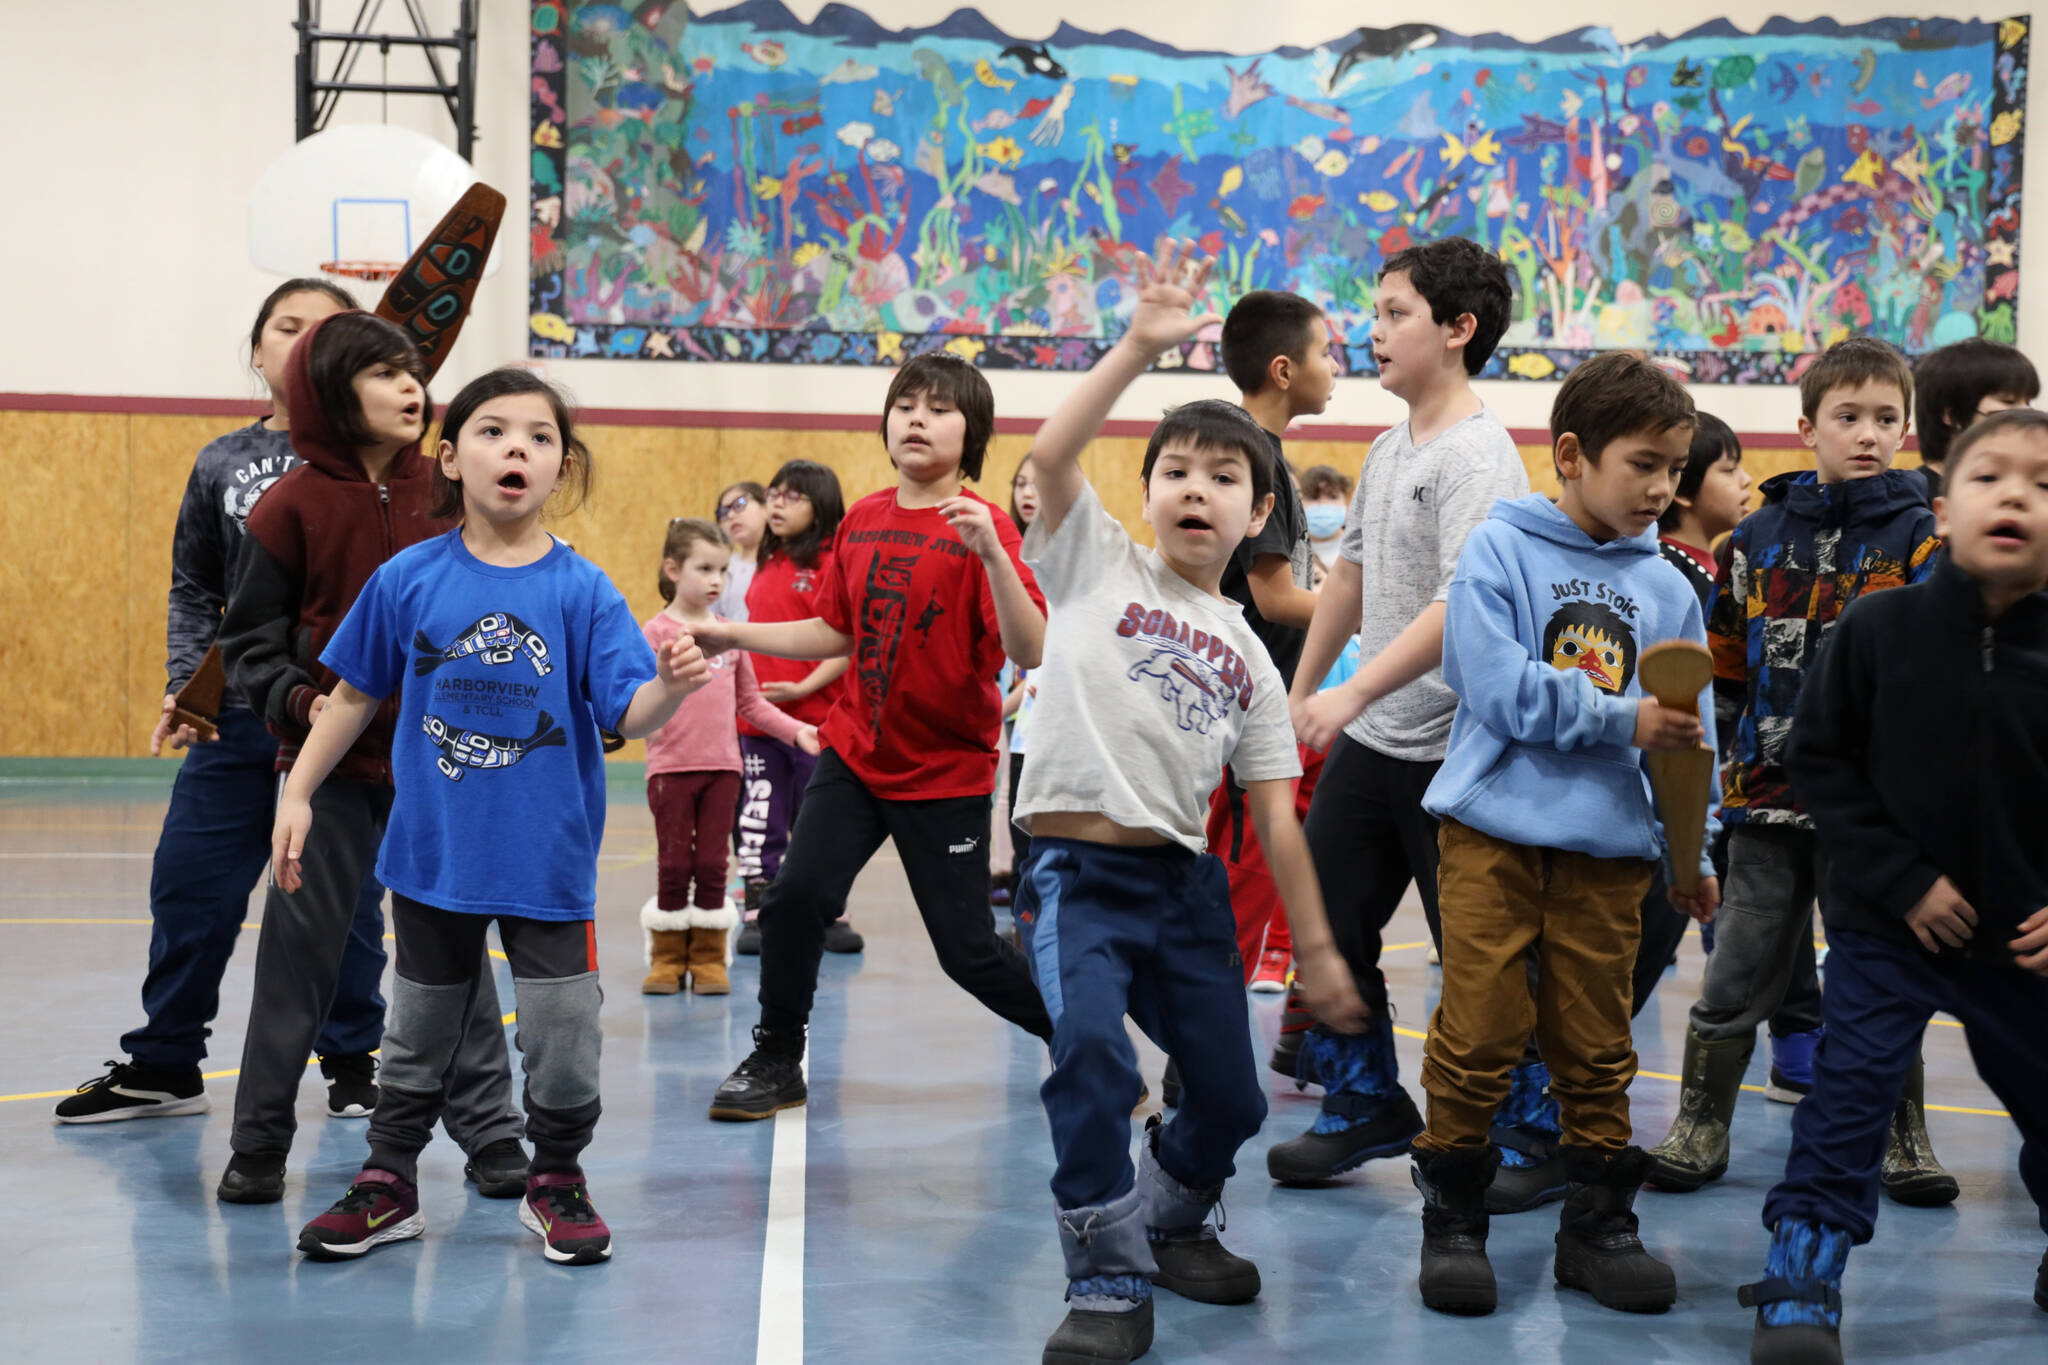 Students from the Tlingit Culture Language and Literacy program at Harborview Elementary School dance in front of elders during the program’s Monday morning meeting. (Clarise Larson / Juneau Empire)
Students from the Tlingit Culture Language and Literacy program at Harborview Elementary School dance in front of elders during the program’s Monday morning meeting. (Clarise Larson / Juneau Empire)